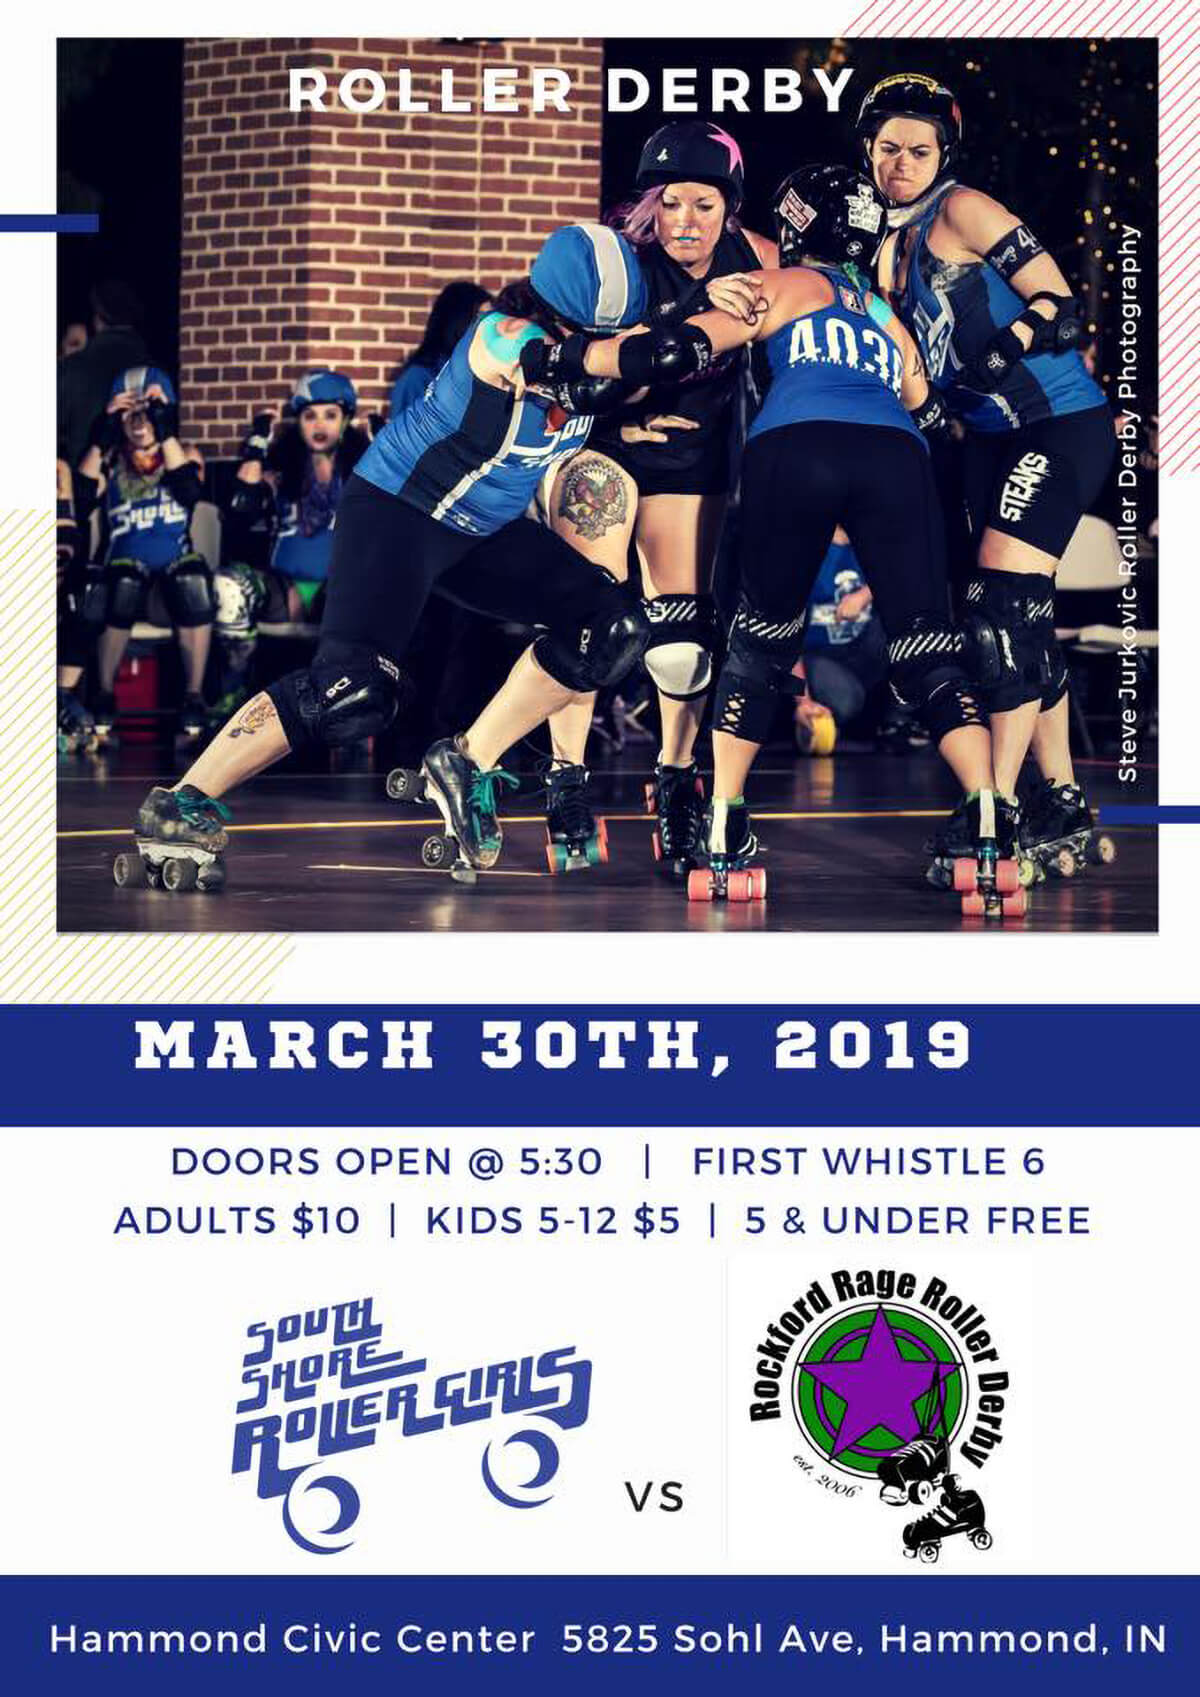 the South Shore Roller Girls back to Hammond as they open their season at the Hammond Civic Center on Saturday, March 30.